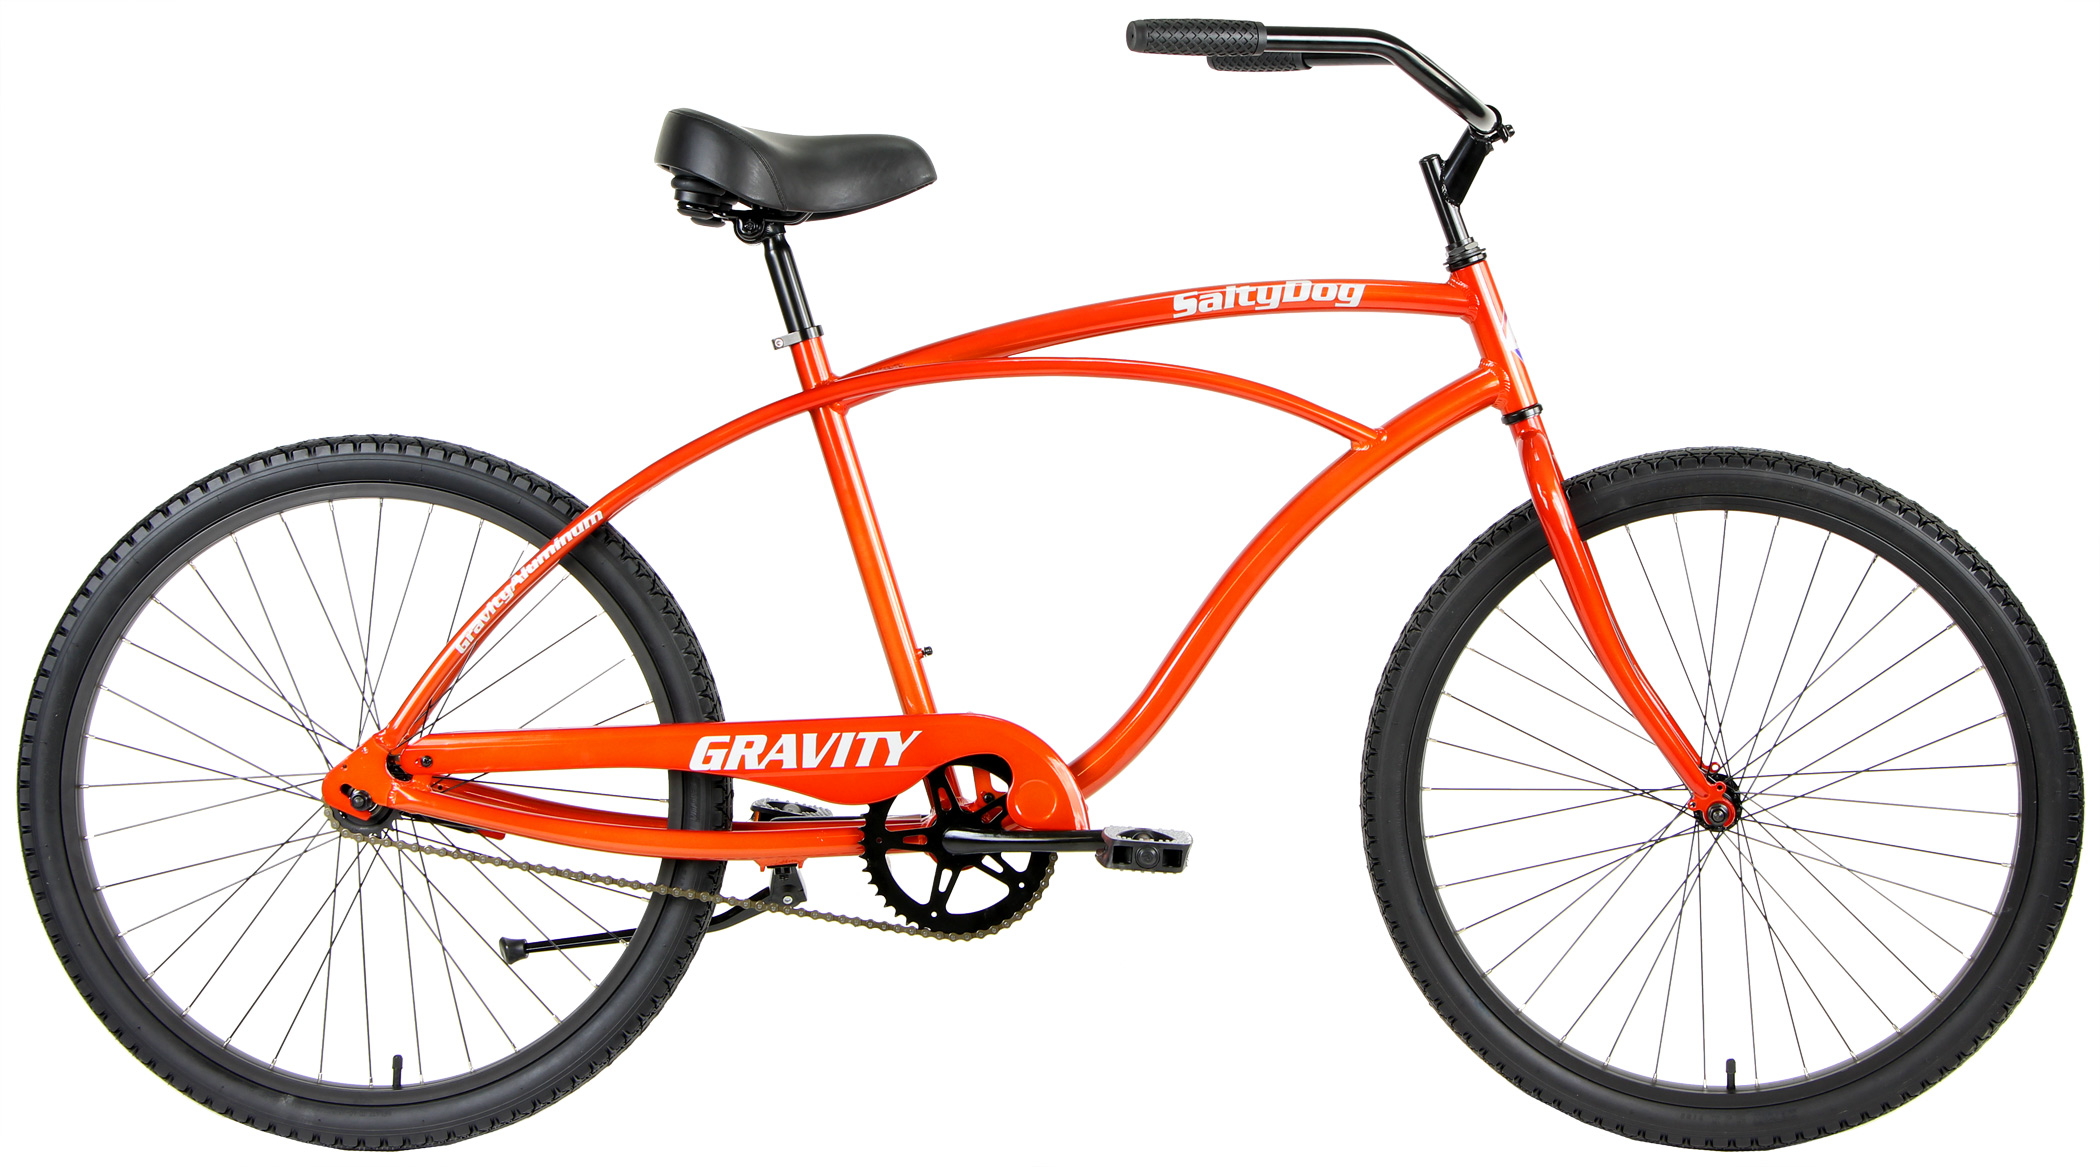 Beeldhouwwerk plaats Vorige Save Up to 60% Off Mens and Women's Aluminum Cruiser Bikes, Gravity Salty  Dog Aluminum Cruiser Bicycles for Town, Neighborhood or Beach Riding  Women's Cruisers come with Stylish and Cute Custom Color